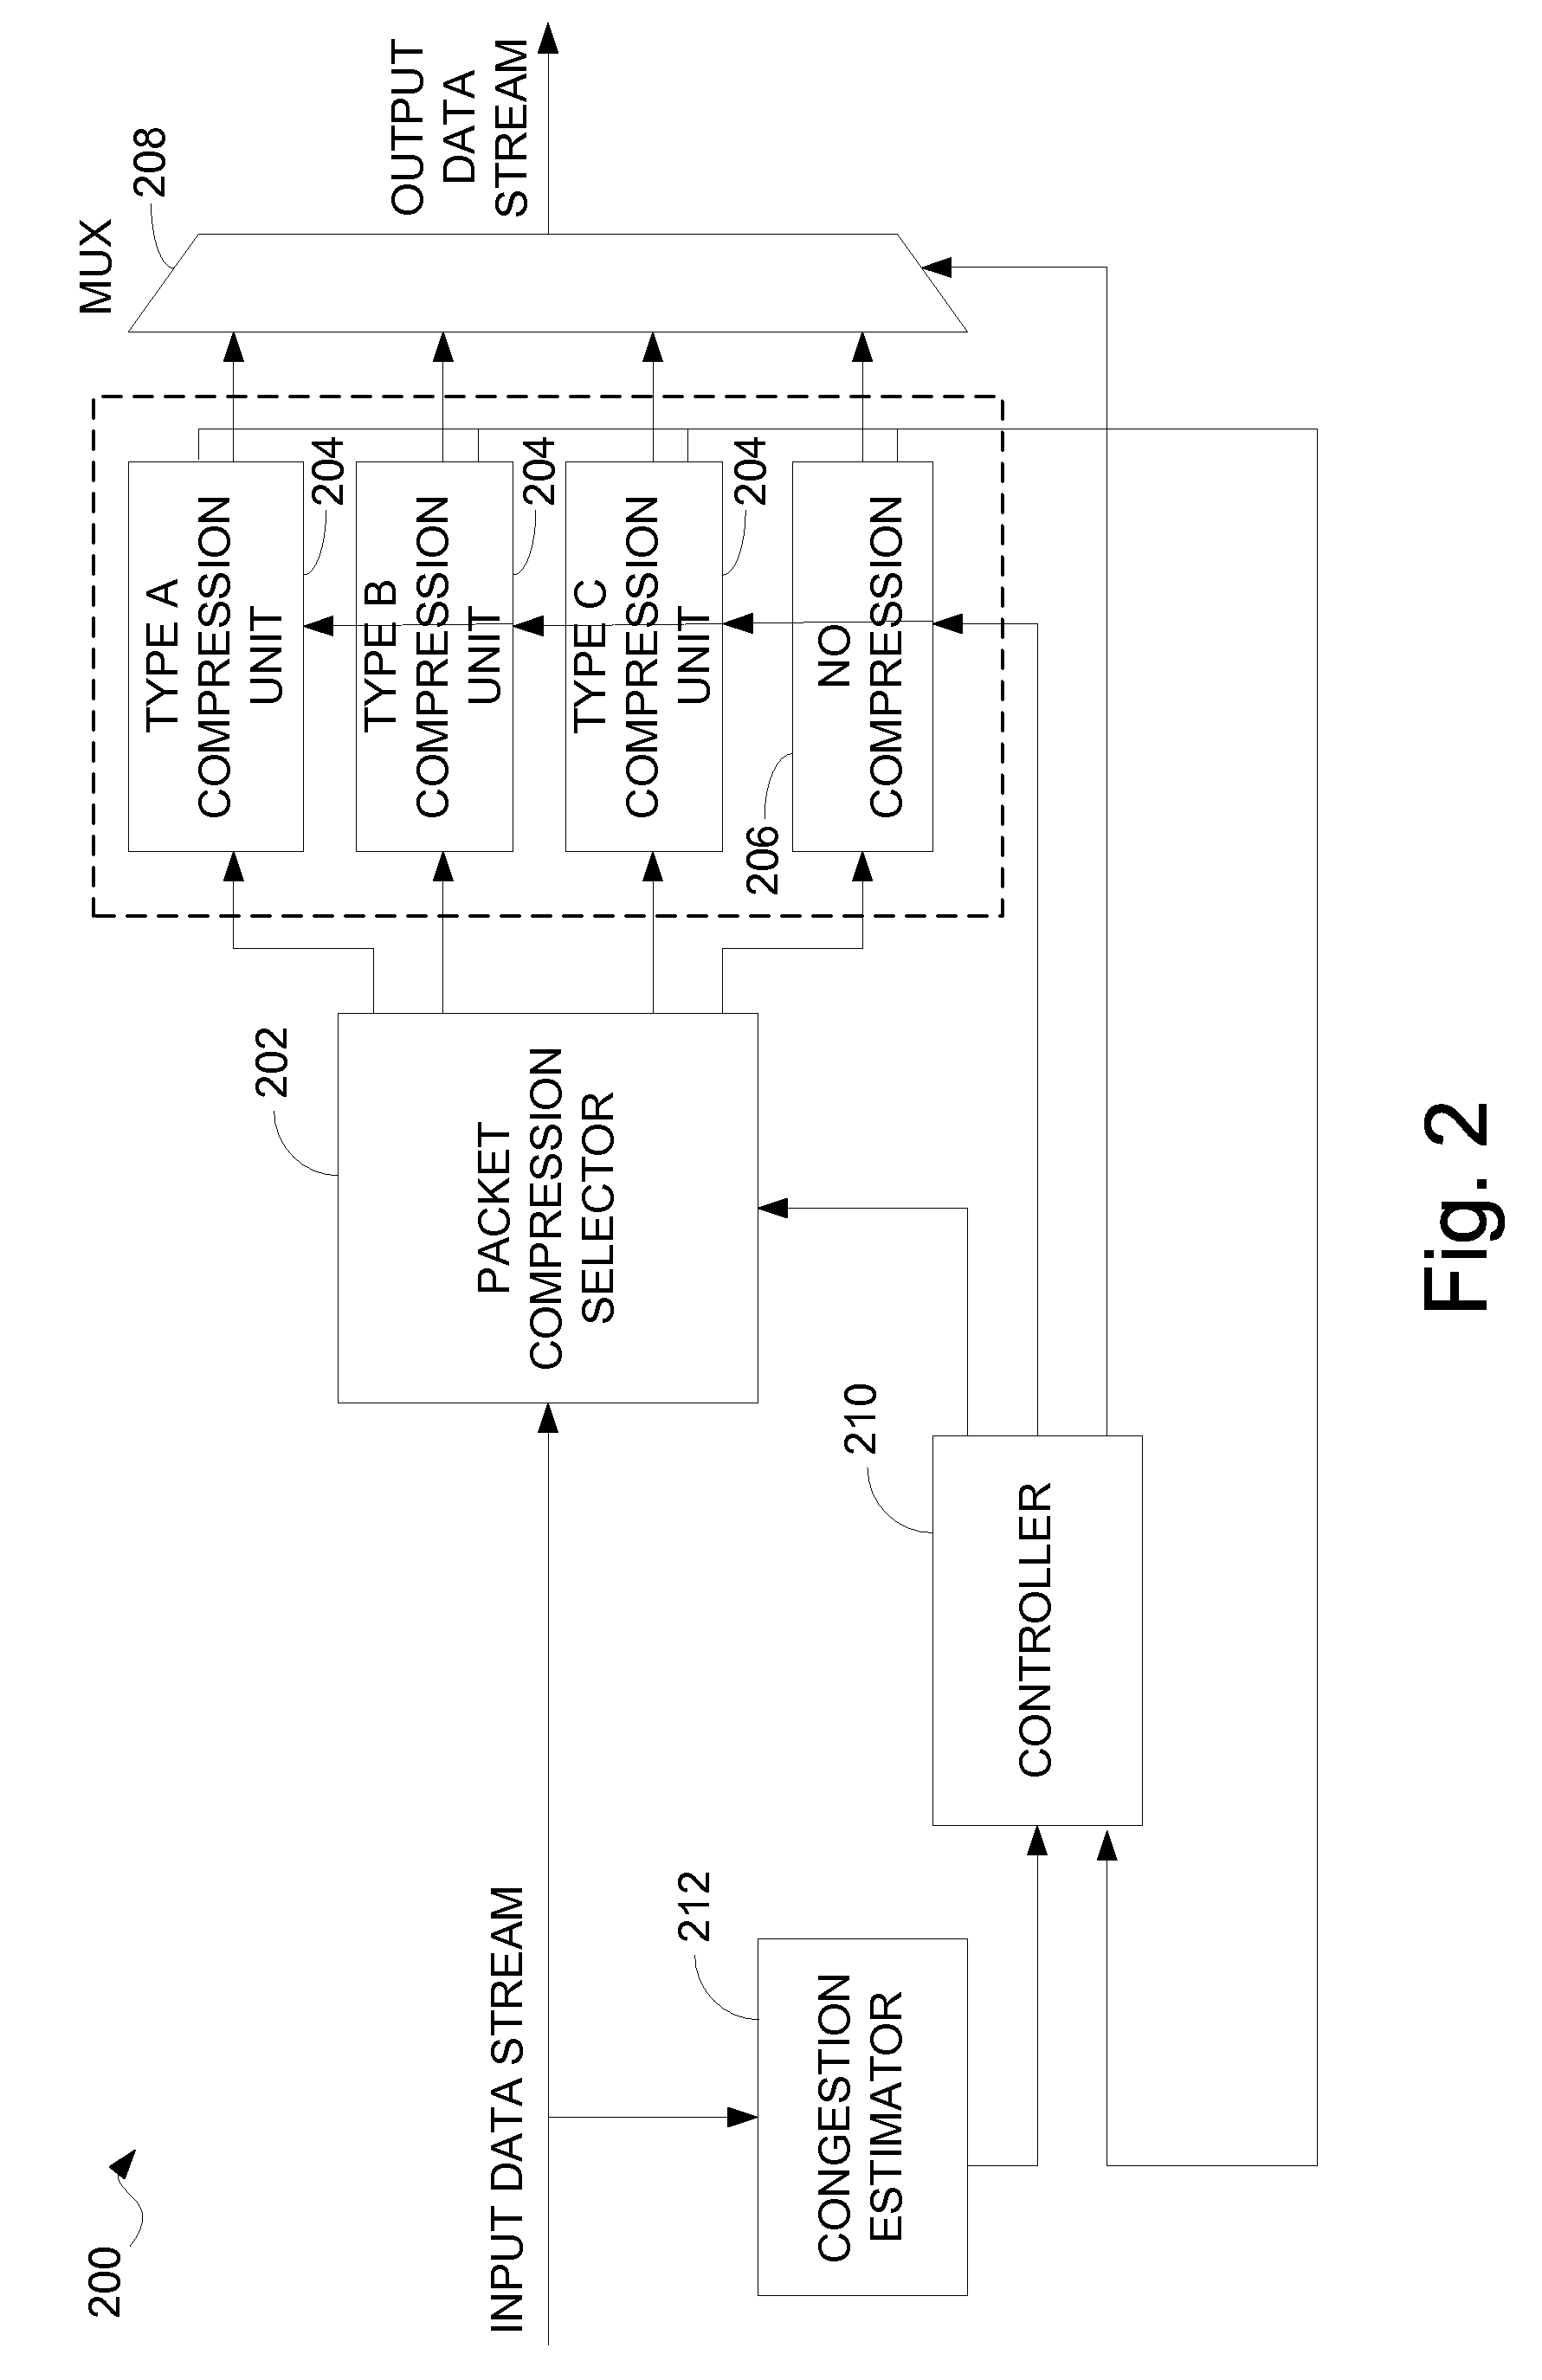 Communication system with content-based data compression